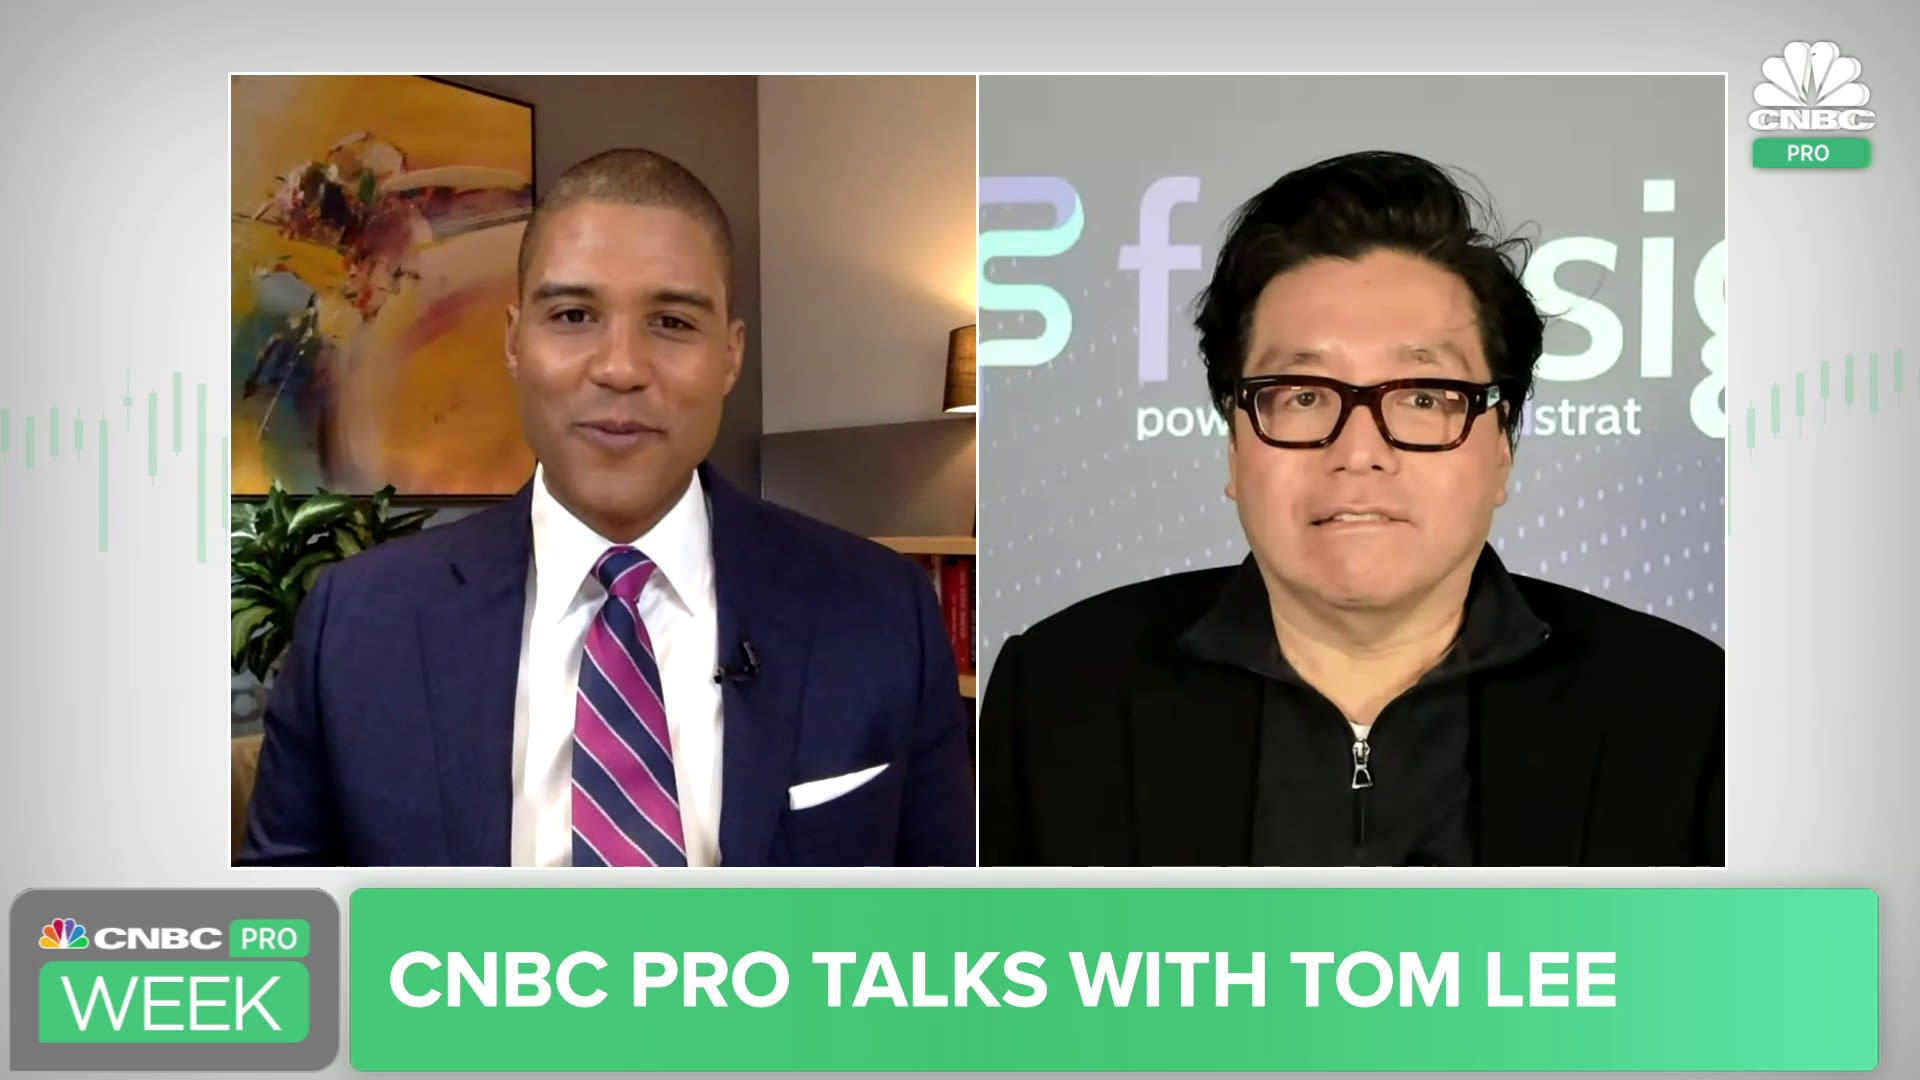 CNBC Pro Week: Tom Lee on his 2023 outlook and buying the dip in tech